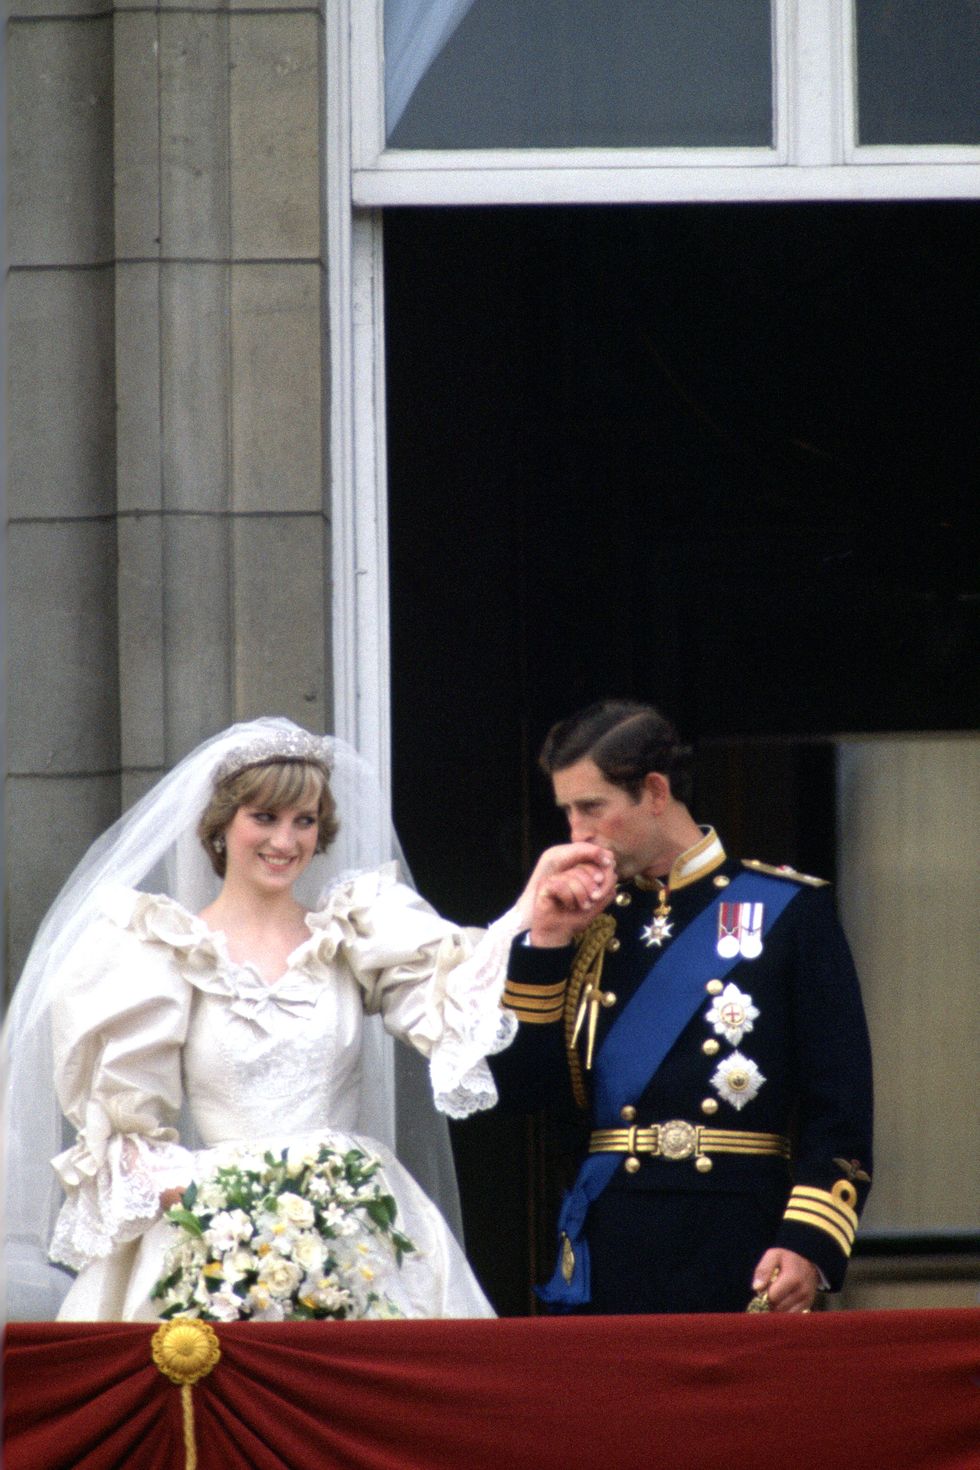 LONDON, UNITED KINGDOM - JULY 29: Prince Charles kisses the hand of his new bride, Princess Diana on the balcony of Buckingham Palace on their wedding day. (Photo by Tim Graham/Getty Images)